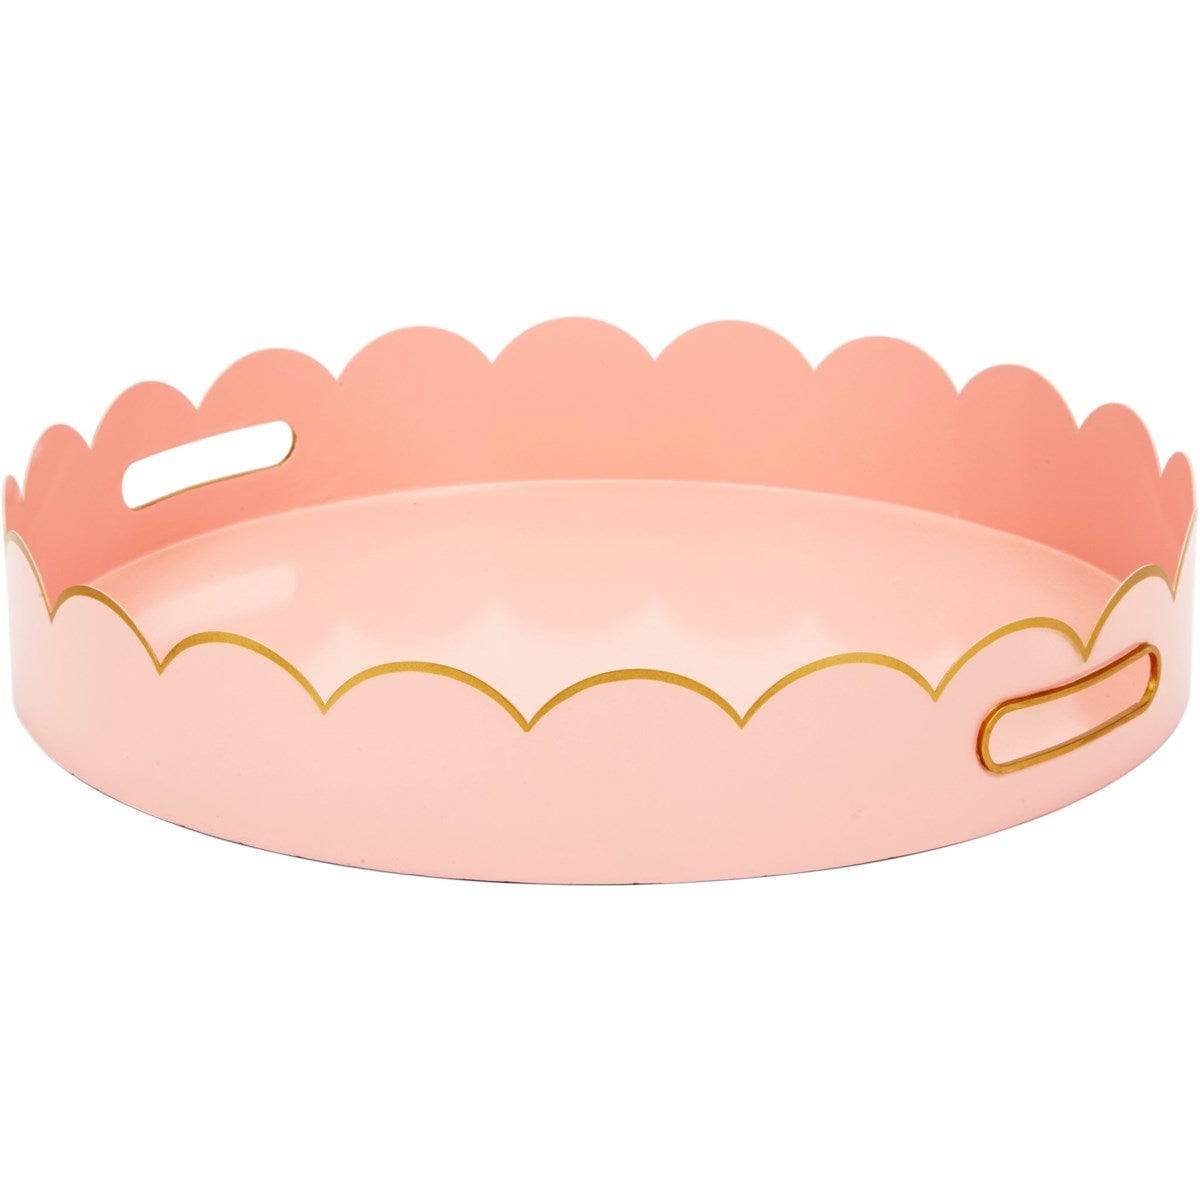 Eloise Pink and Gold Scallop Round Metal Tray - The Preppy Bunny